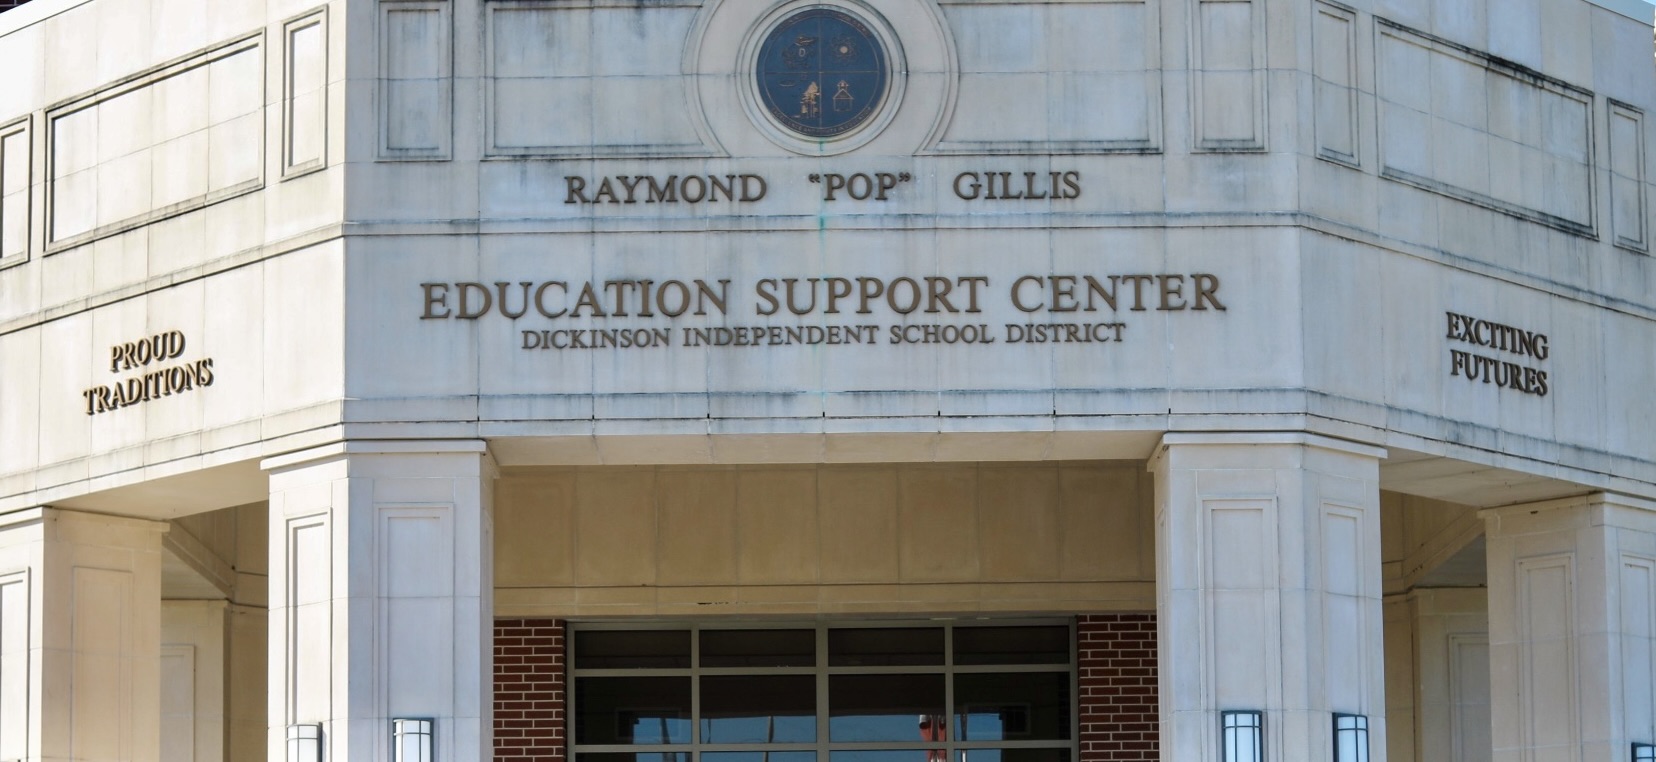 Dickinson ISD Education Support Center